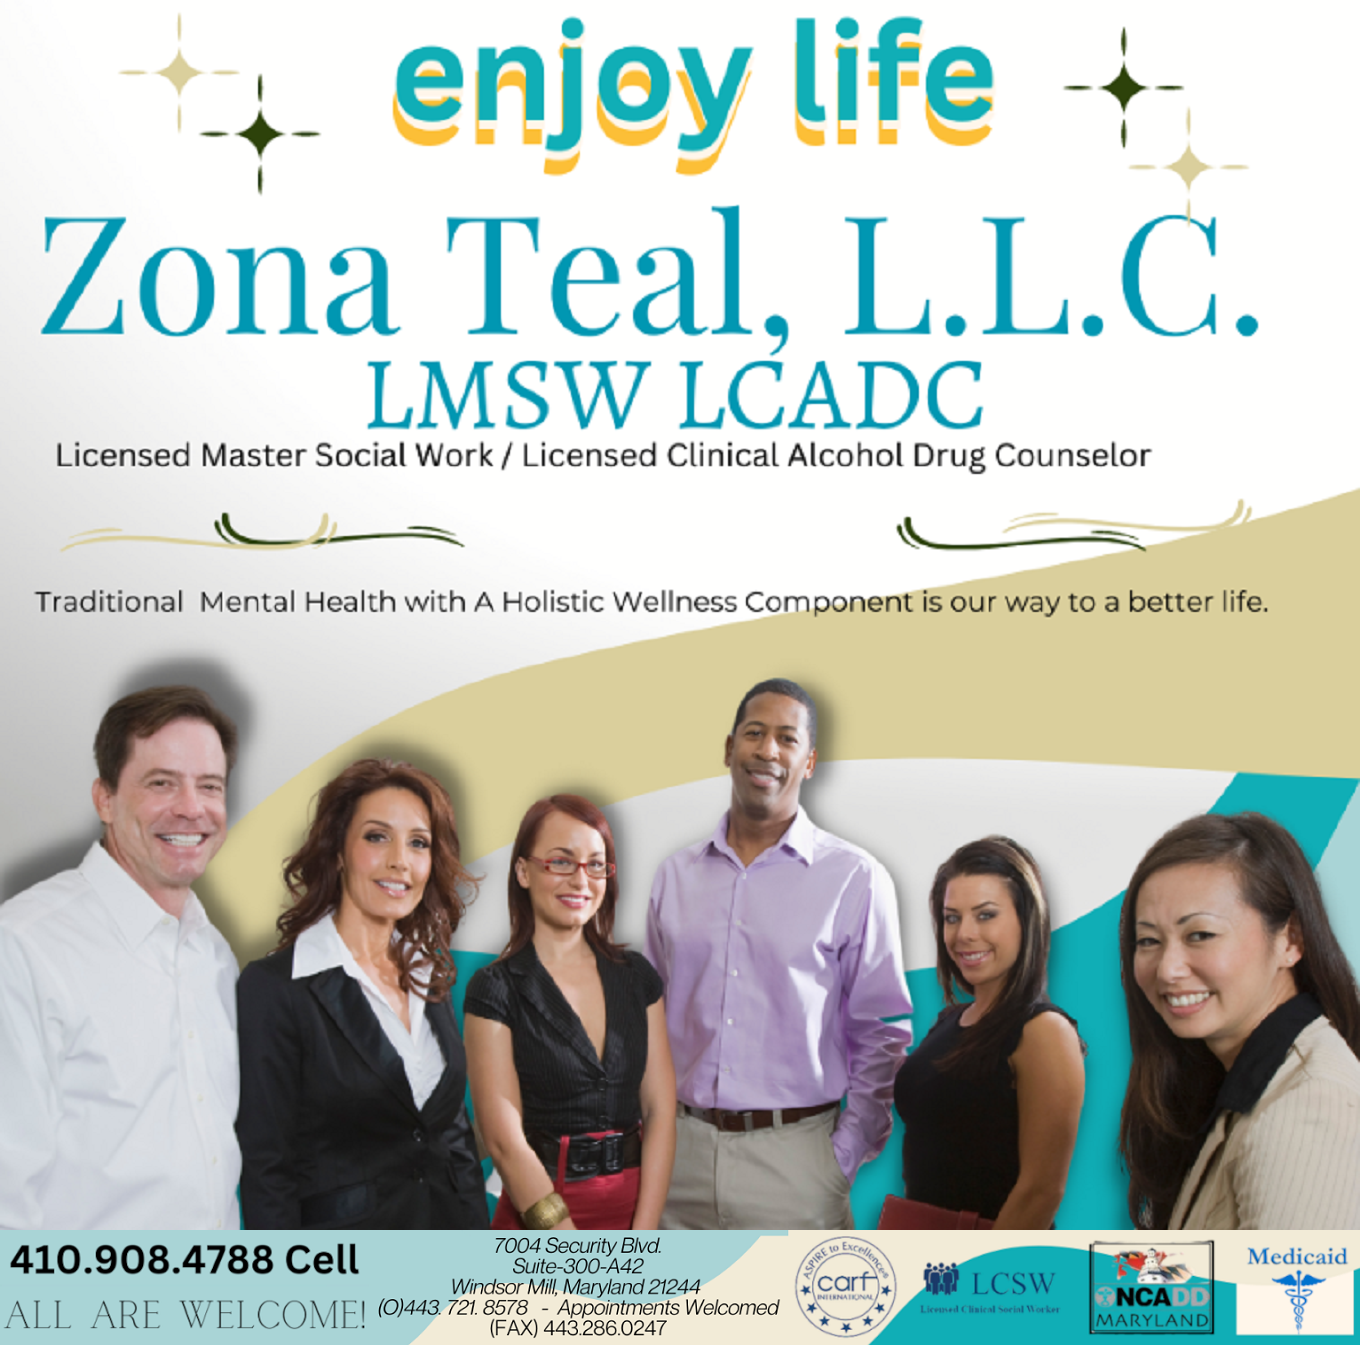 Enjoy Life! Zona Teal, L.L.C. LMSW LCADC, Licensed Master Social Work, Licensed Clinical Alcohol Drug Counselor. Traditional Mental Health with A Holistic Wellness Component is our way to a better life. 410-908-4788 Cell. All Are Welcome! 7004 Security Blvd., Suite 300-A42, Windsor Mill, MD 21244, Office 443-721-8578, FAX 443-286-0247. Appointments Welcomed. CARF International. LCSW Licensed Clinical Social Worker. NCADD Maryland. Medicaid.